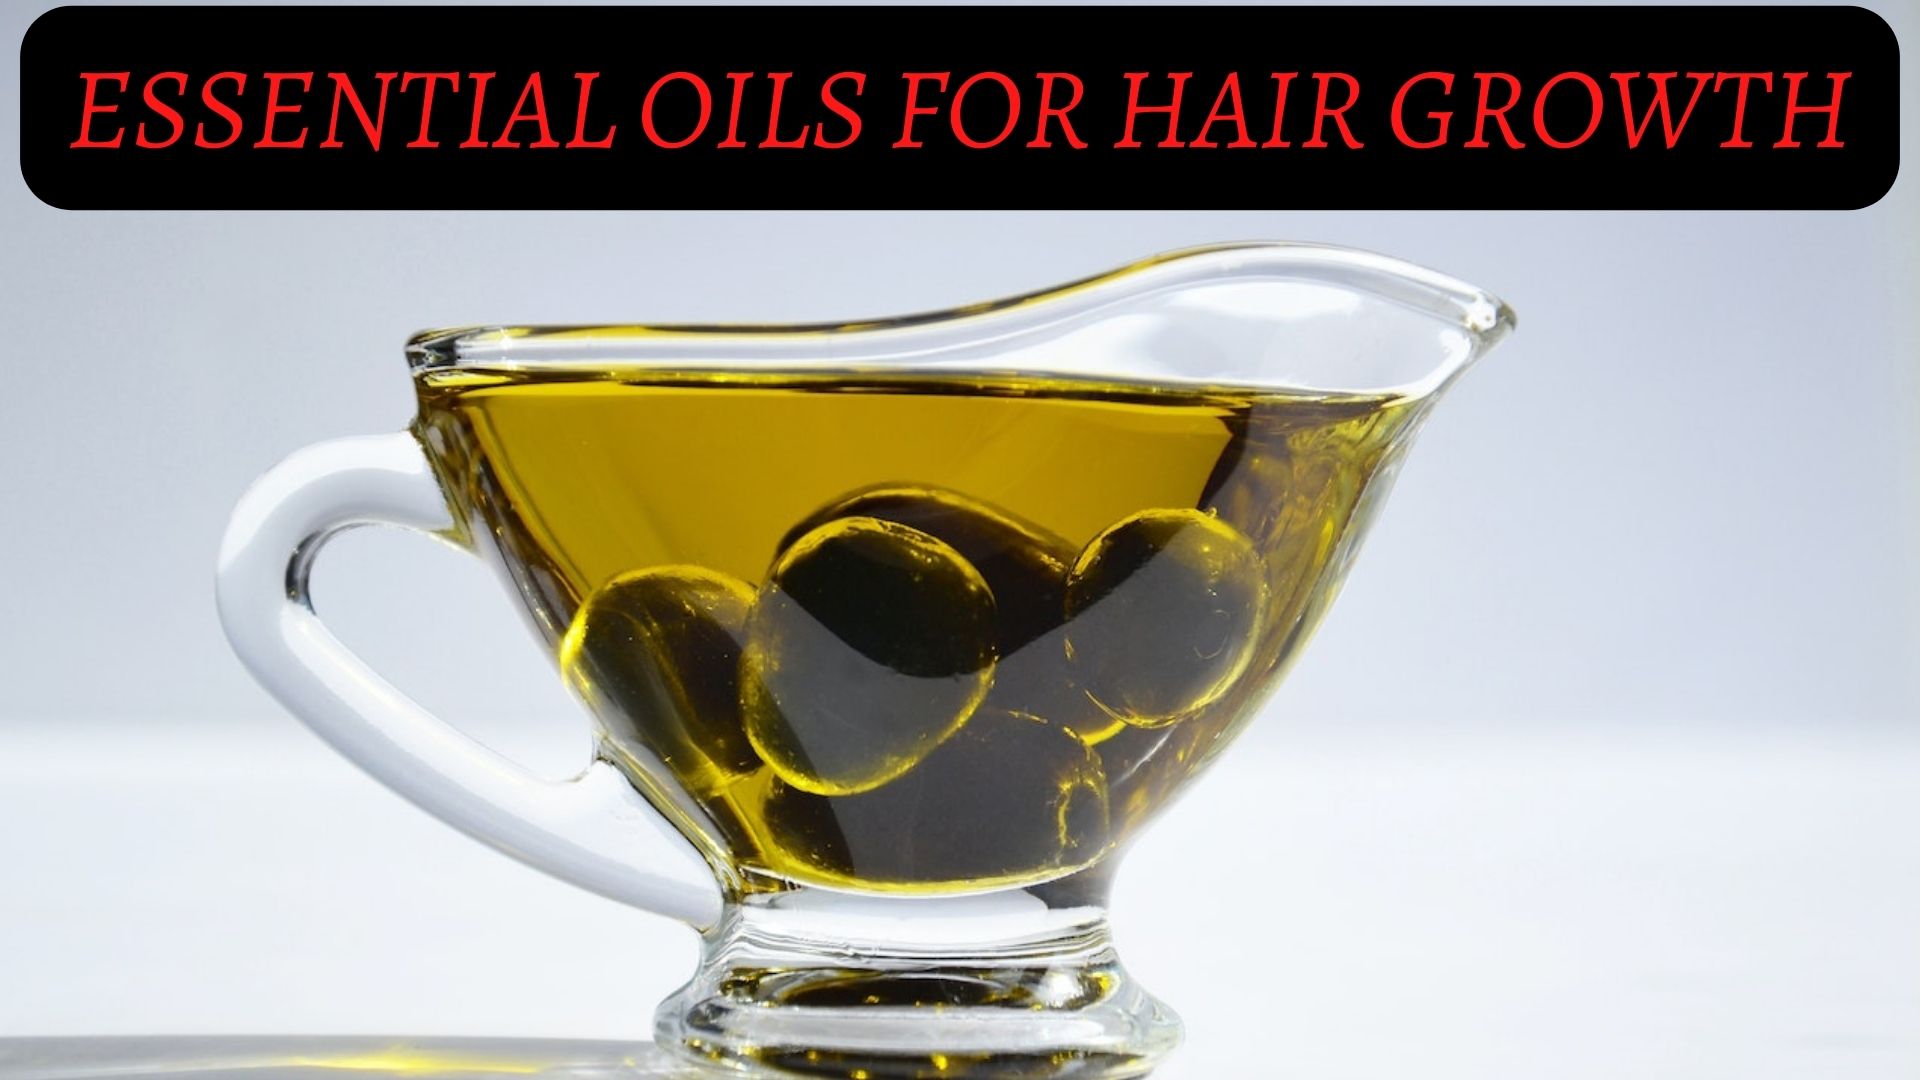 Essential Oils For Hair Growth - Help With Hair Loss And Regrowth